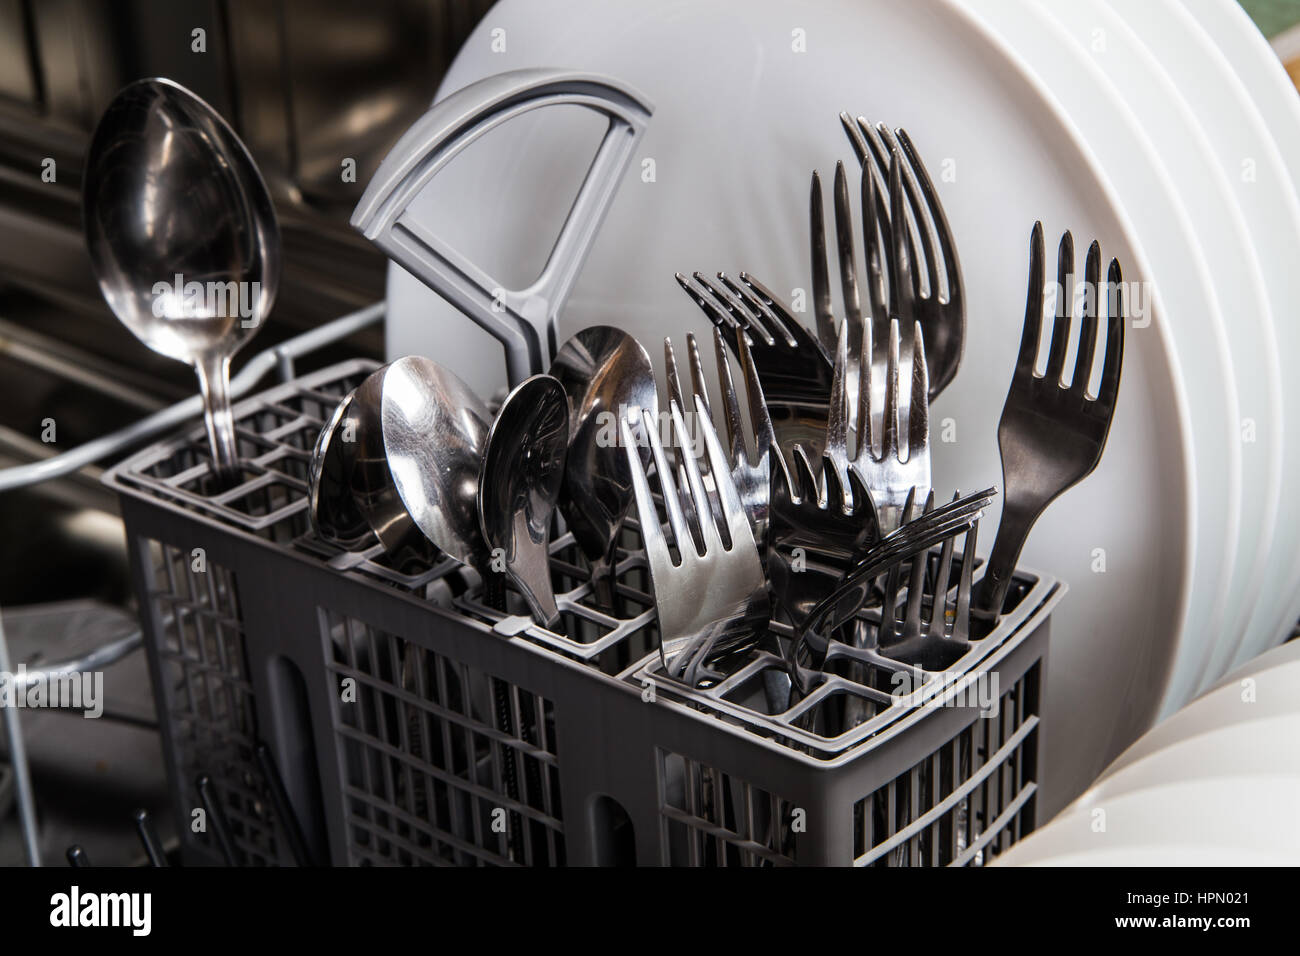 Steel forks and white plates in dishwasher machine Stock Photo